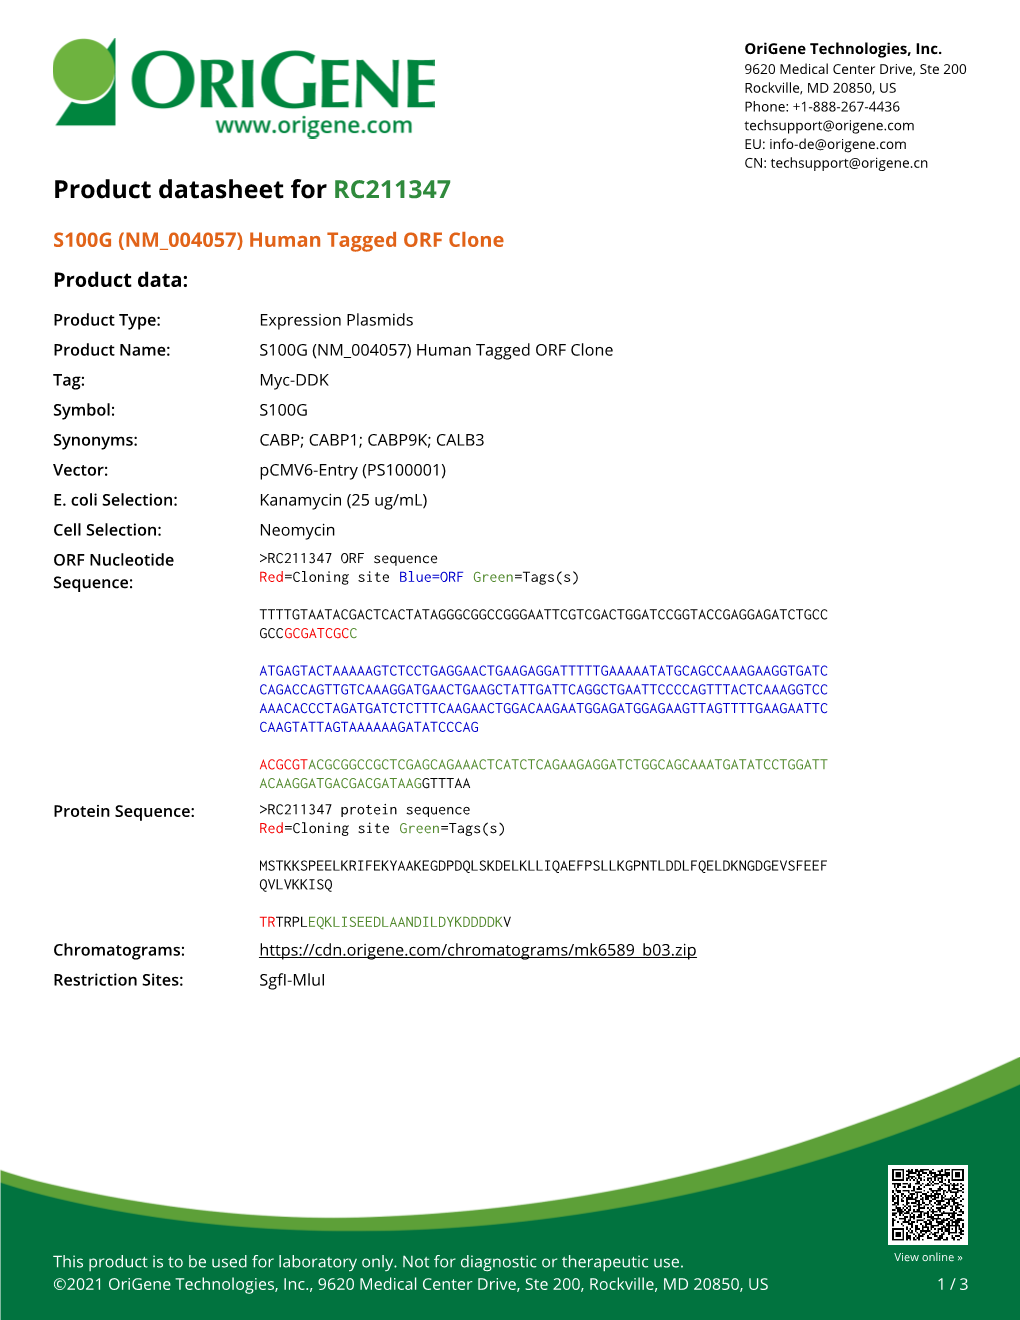 S100G (NM 004057) Human Tagged ORF Clone Product Data